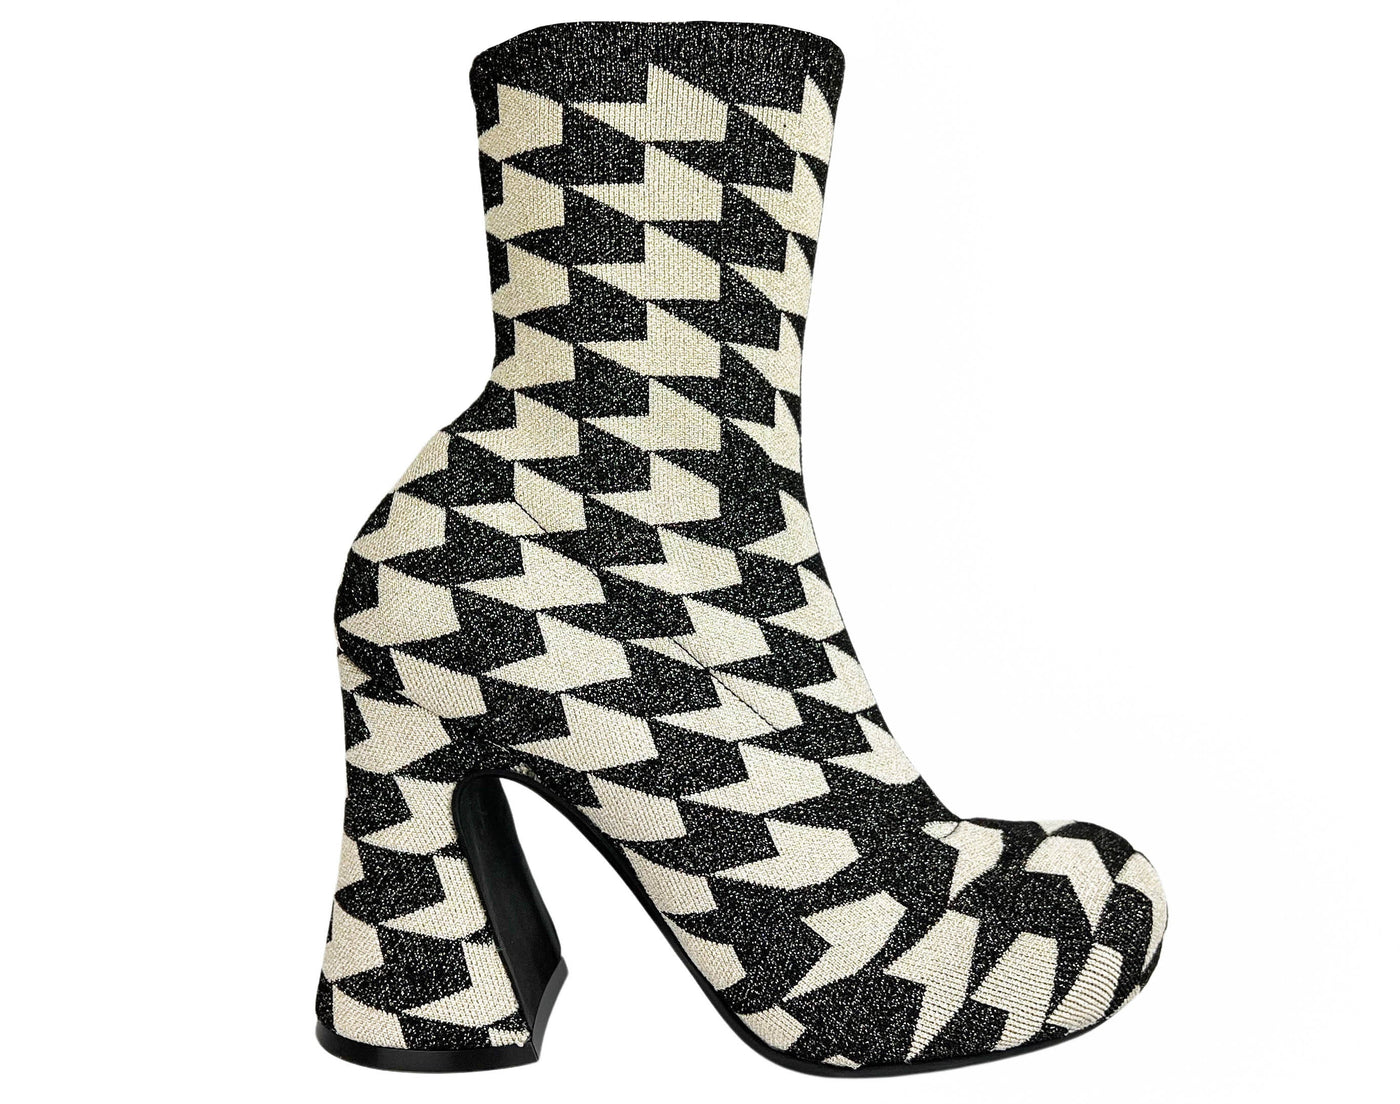 Marni Jacquard Lurex Ankle Boots in Black and Cream - Discounts on Marni at UAL